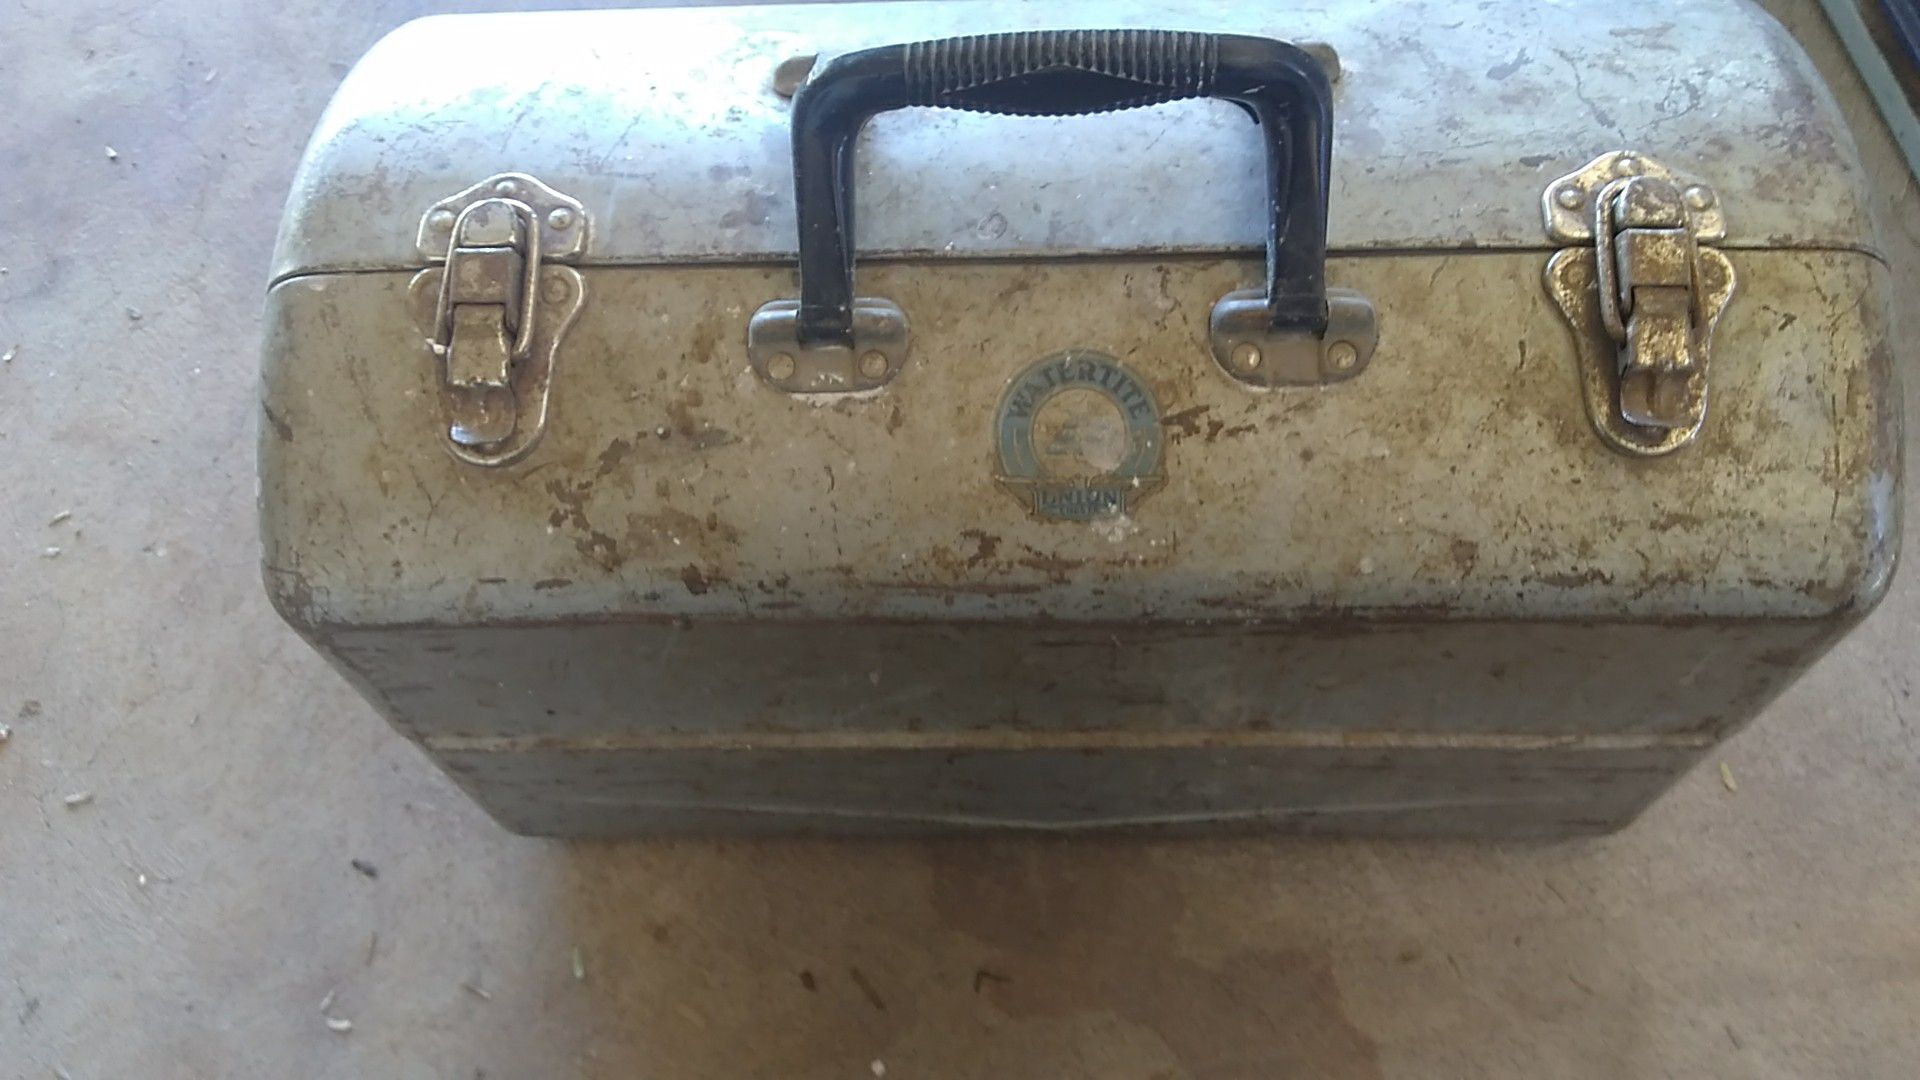 Vintage Union tool box water proof with tools in it